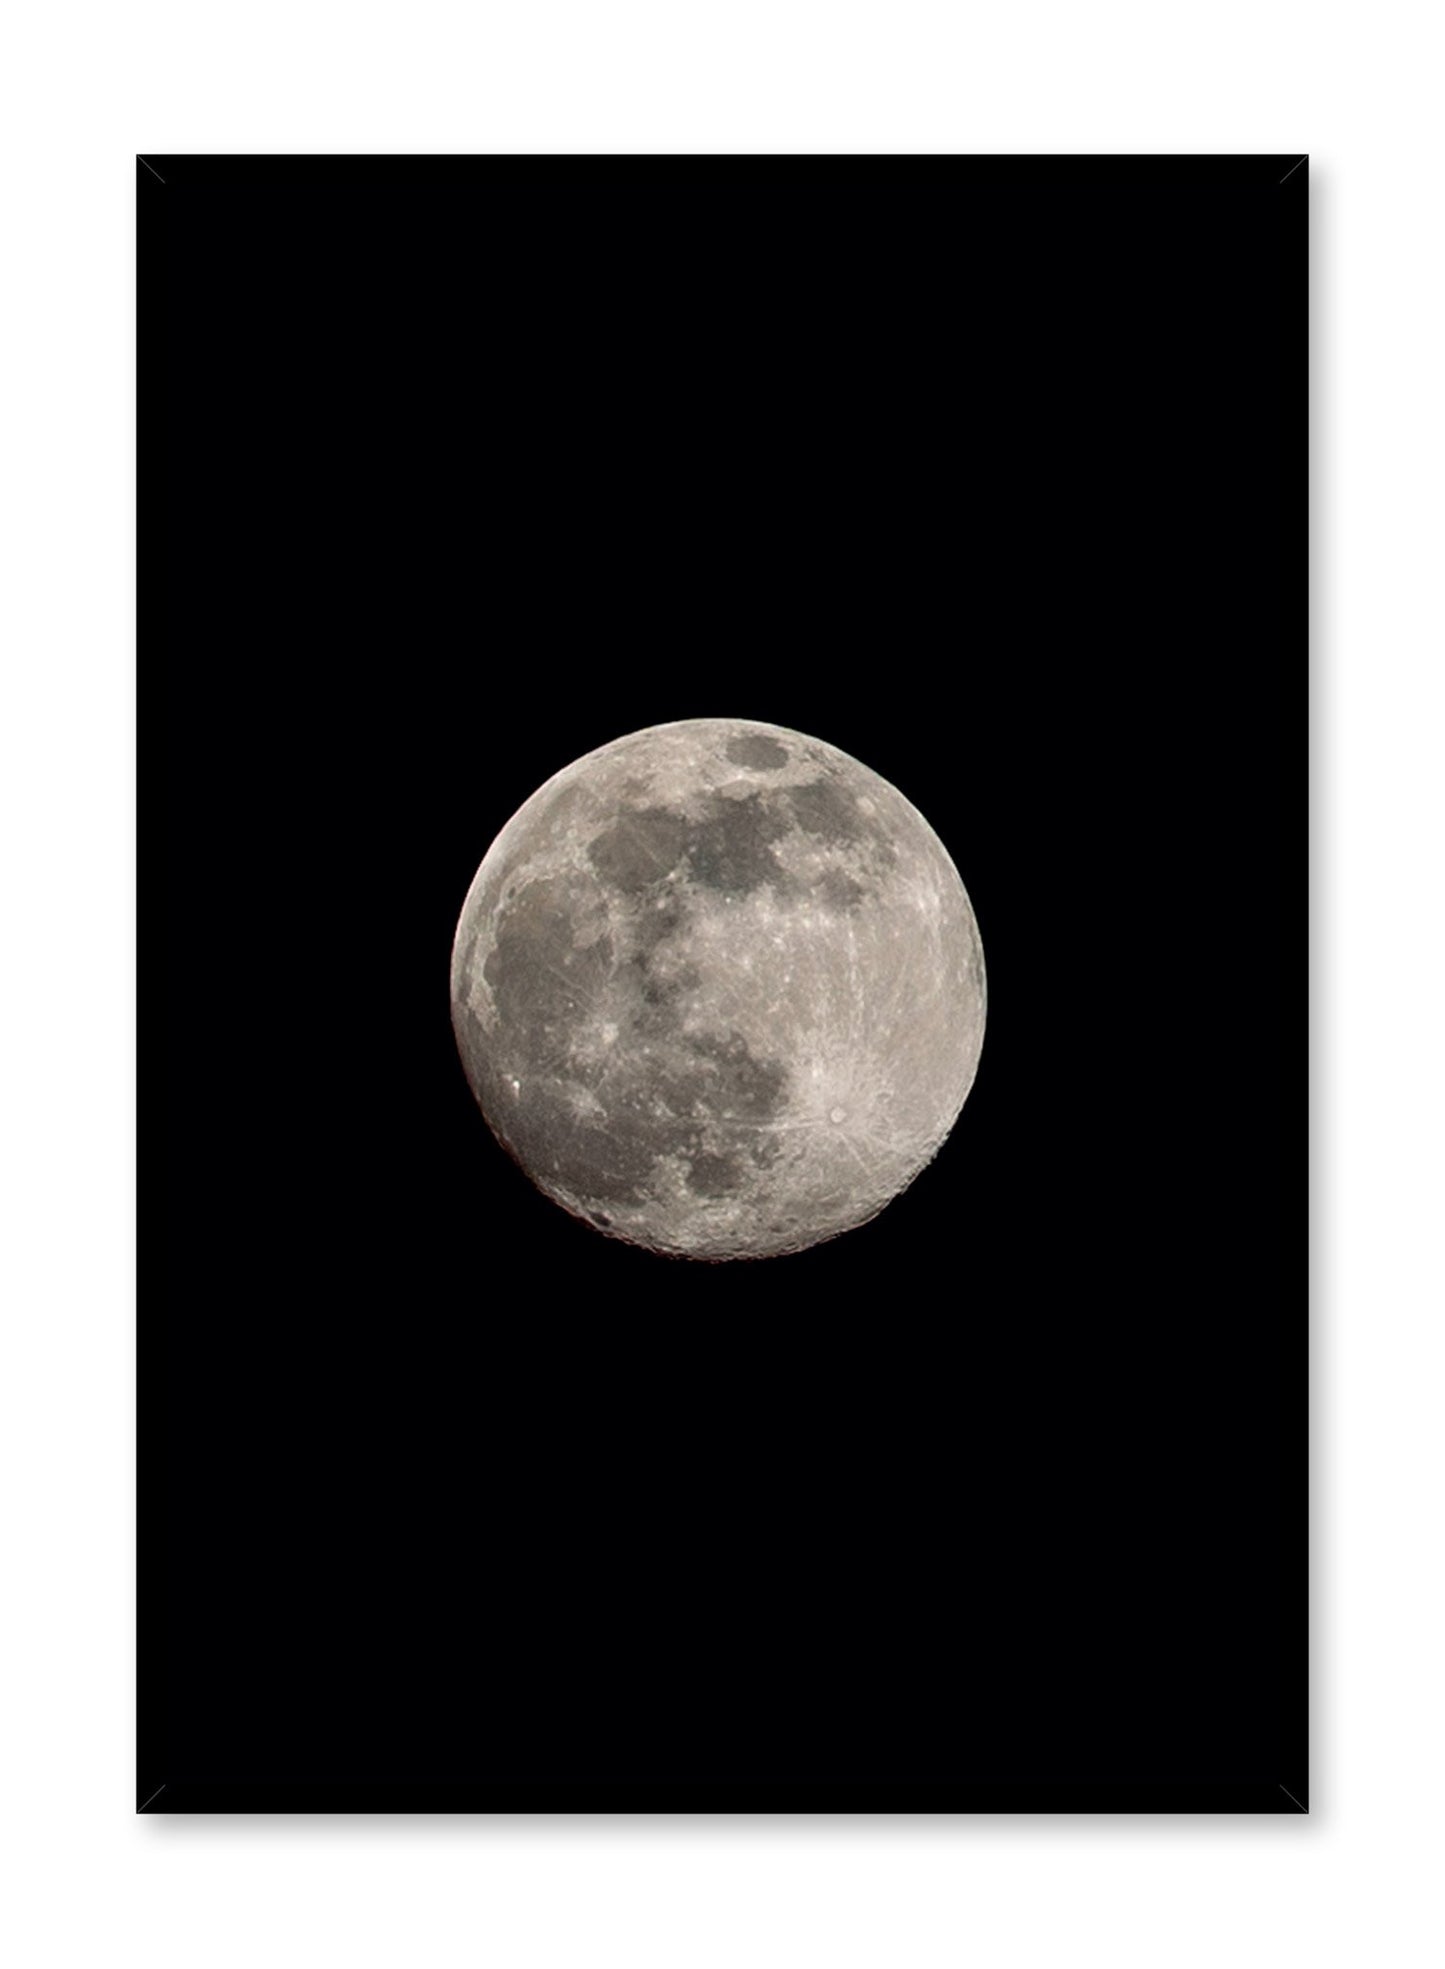 Celestial photography poster by Opposite Wall with bright moon Luna